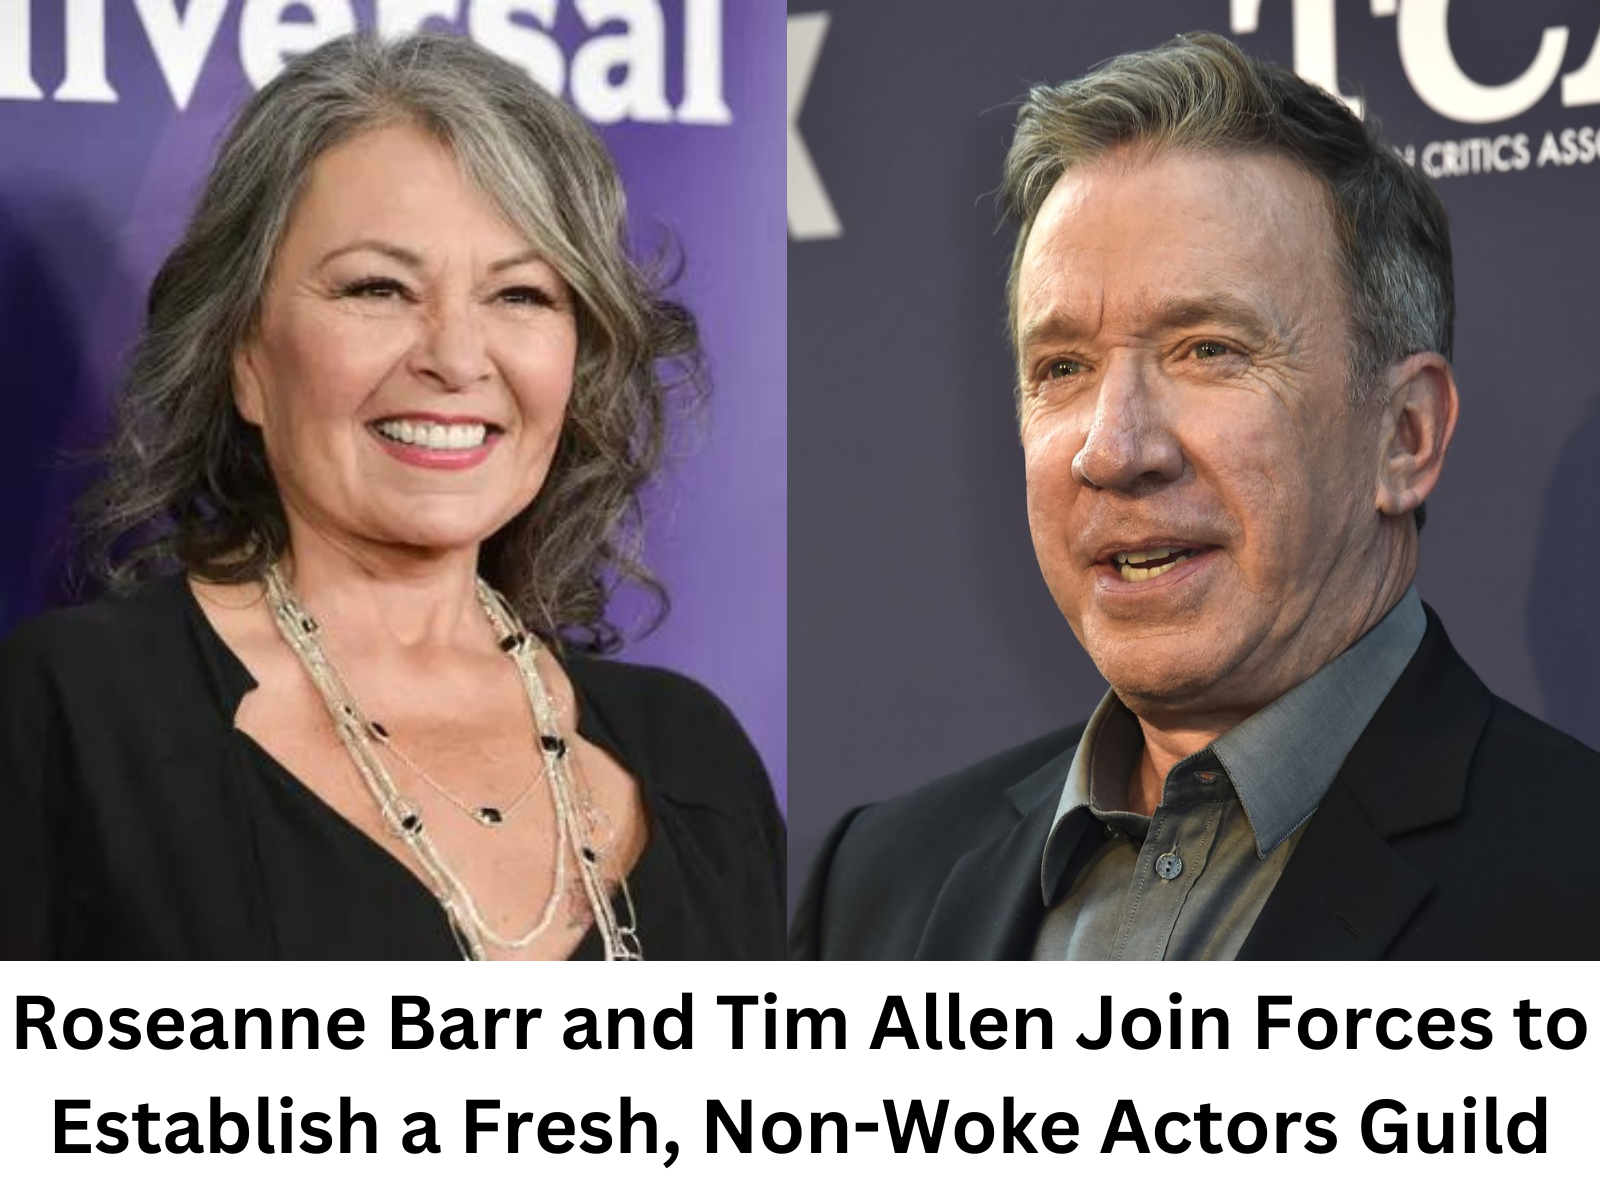 Roseanne Barr and Tim Allen Take on Hollywood’s Woke Culture with New Non-Woke Actors Guild